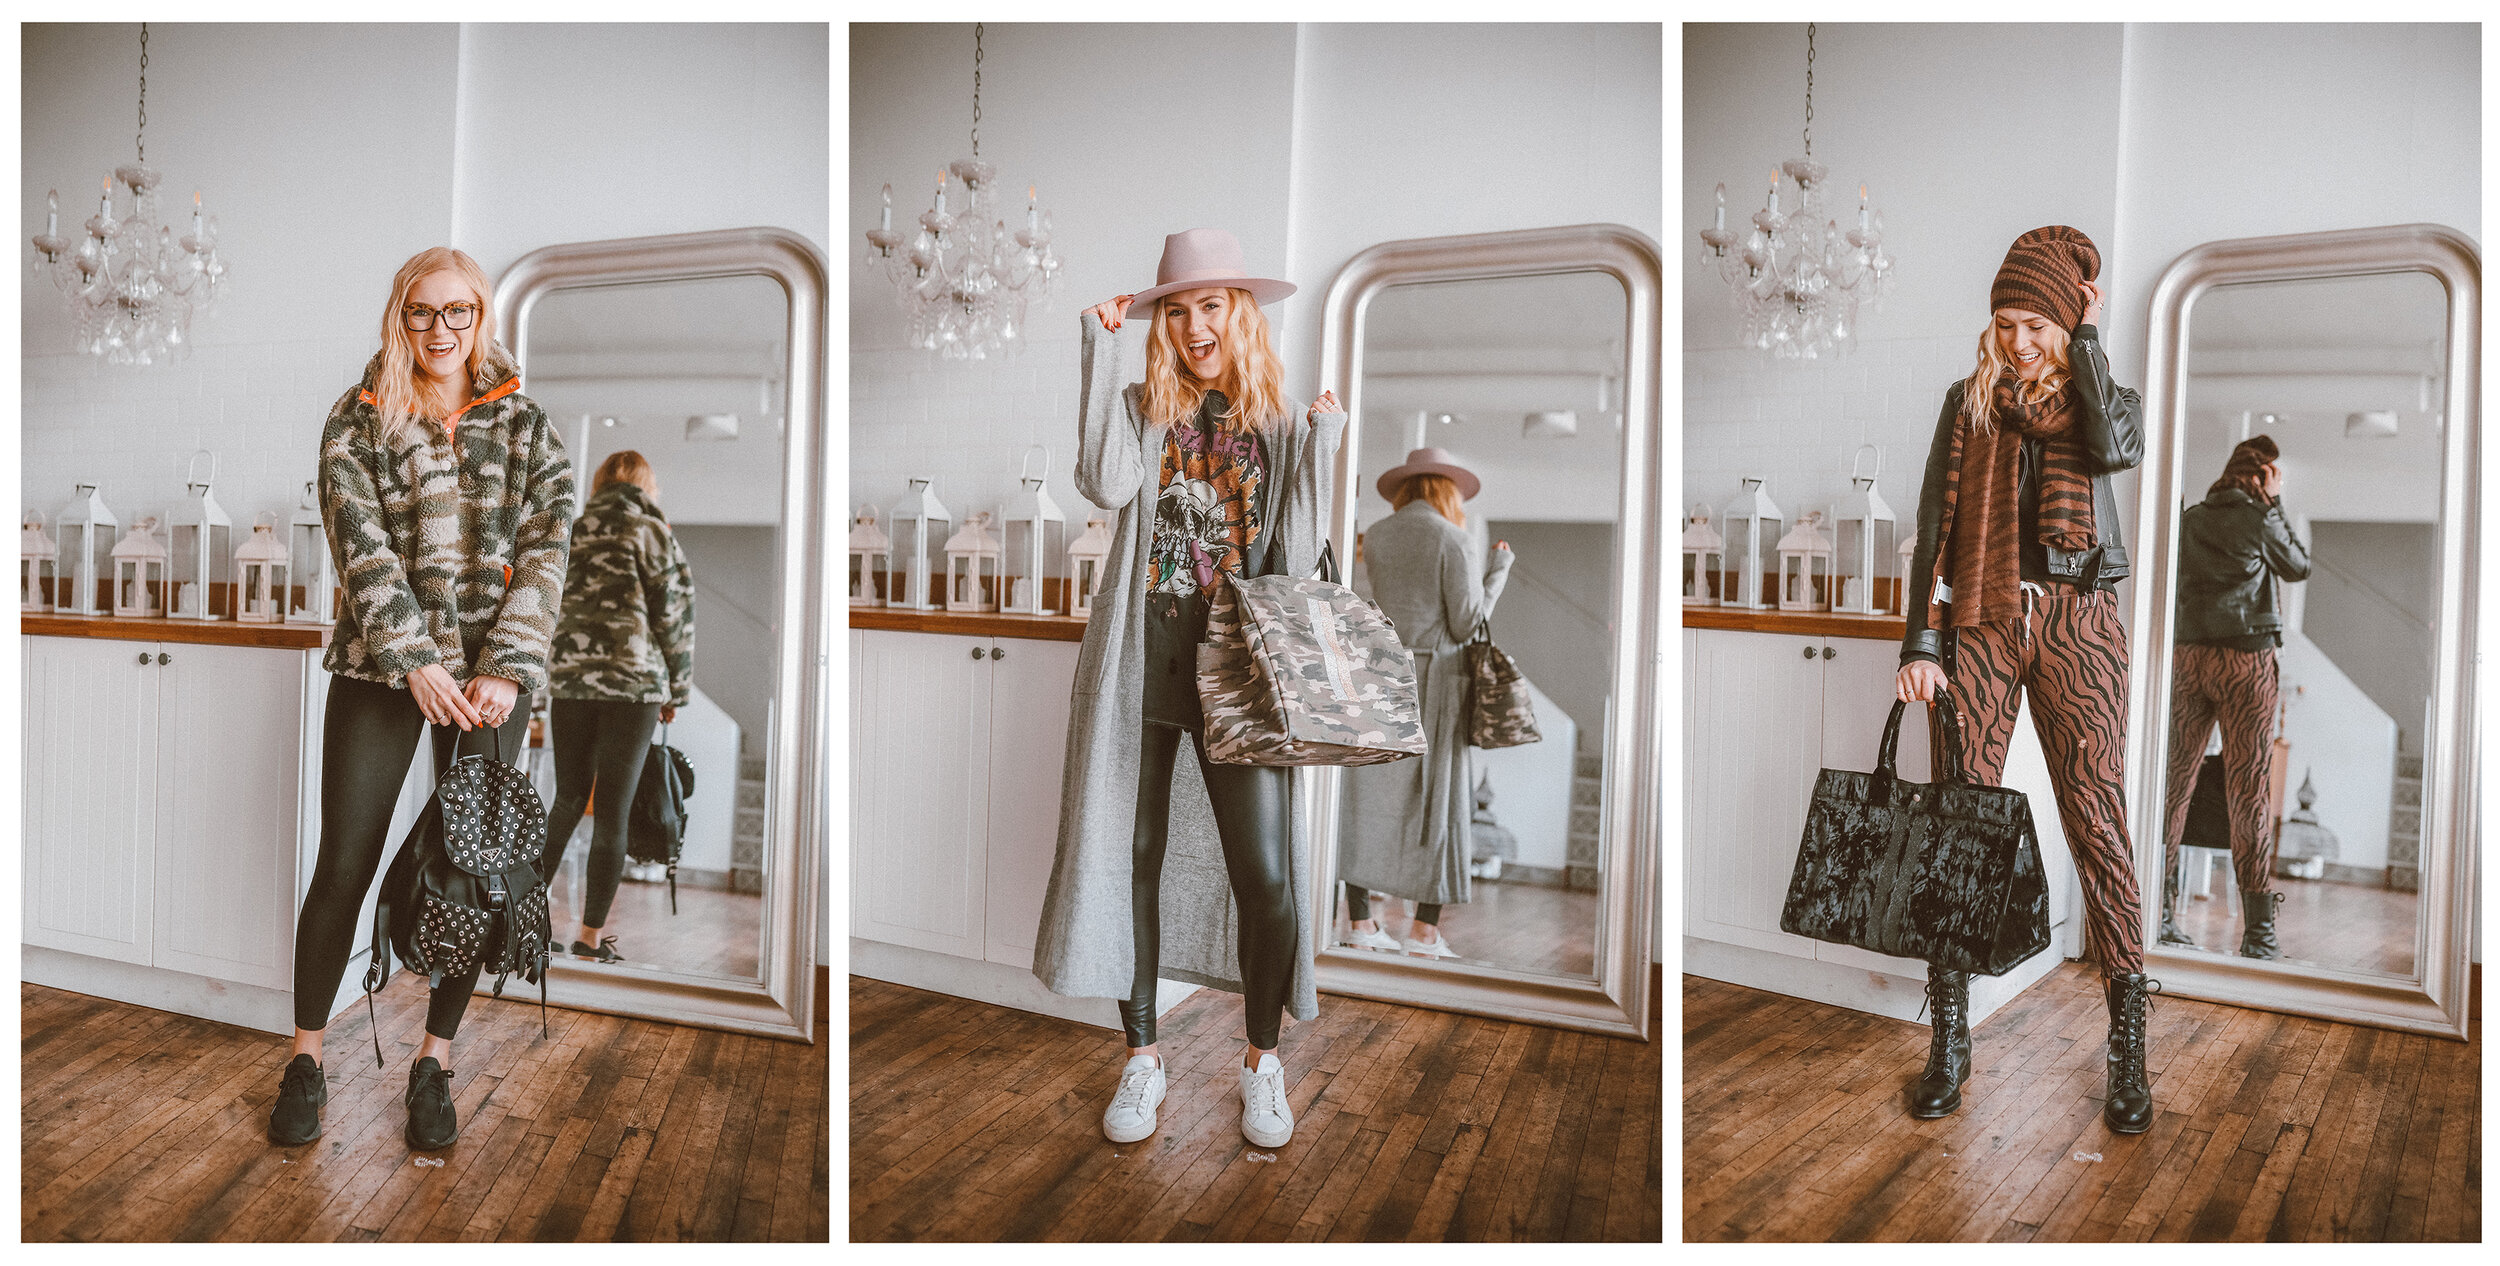 3 Different Travel Looks to Stay Comfy and Chic at 30,000 Feet